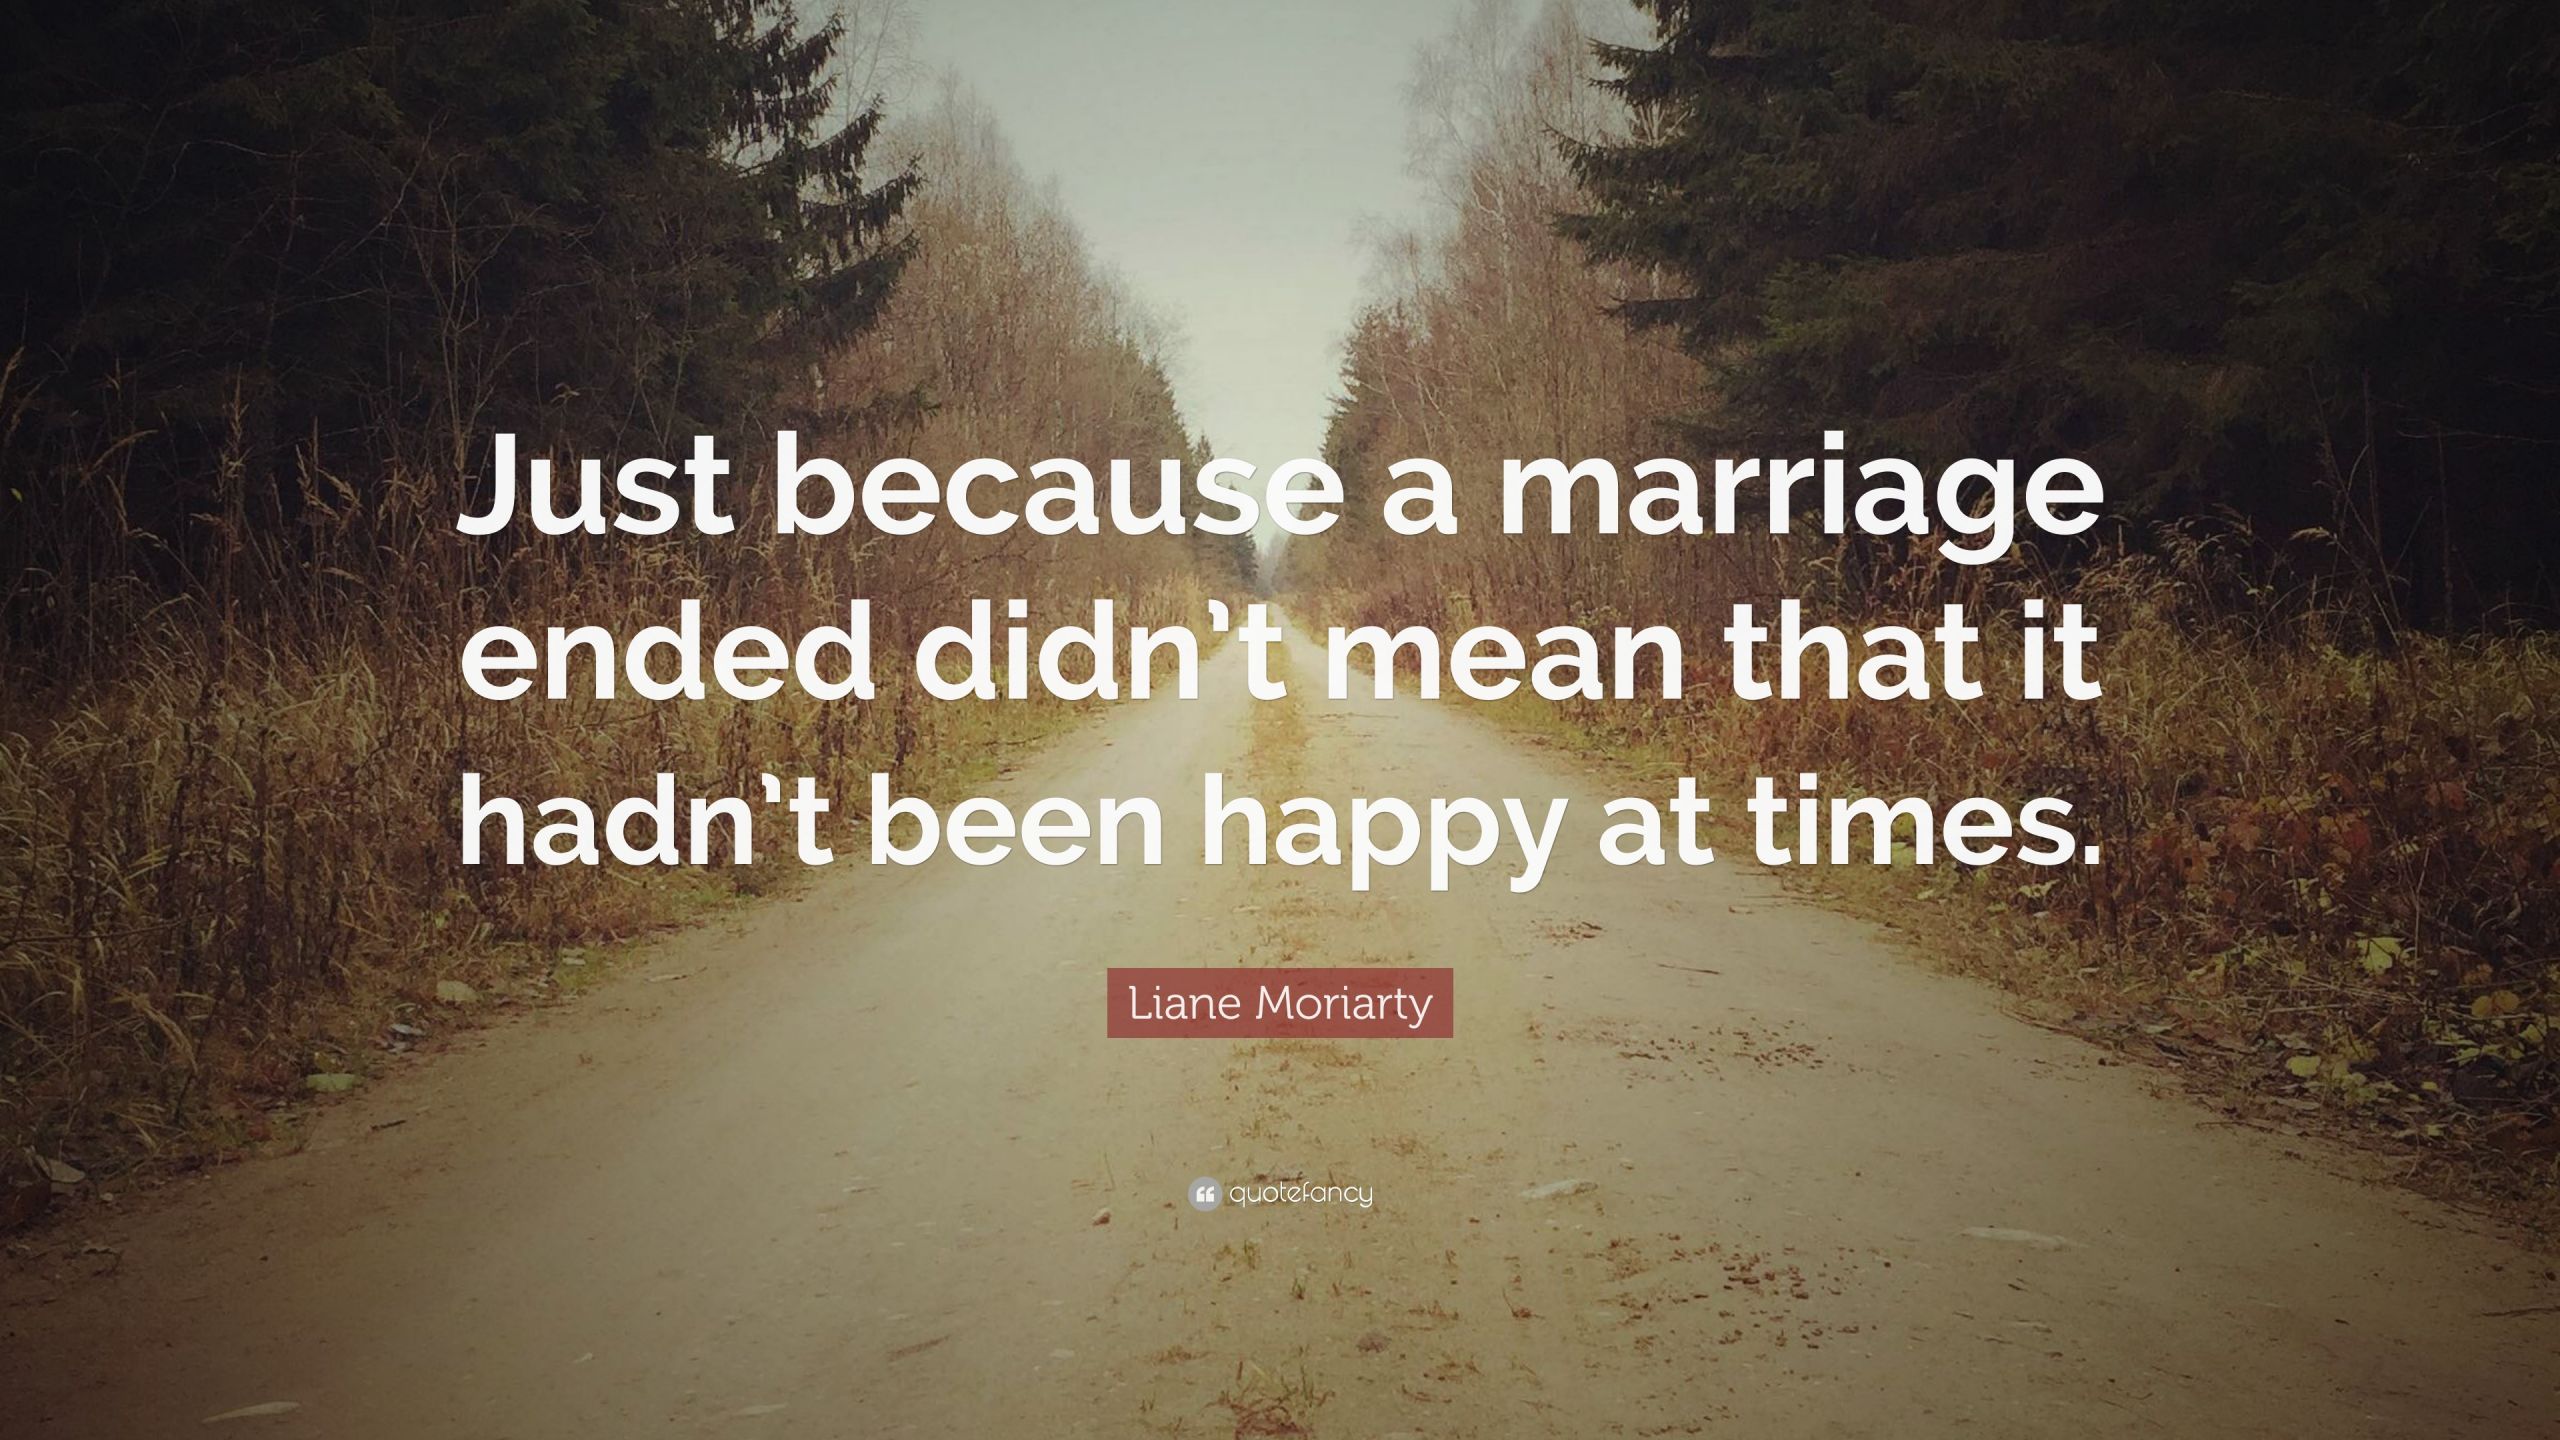 Marriage Ended Quotes
 Liane Moriarty Quote “Just because a marriage ended didn